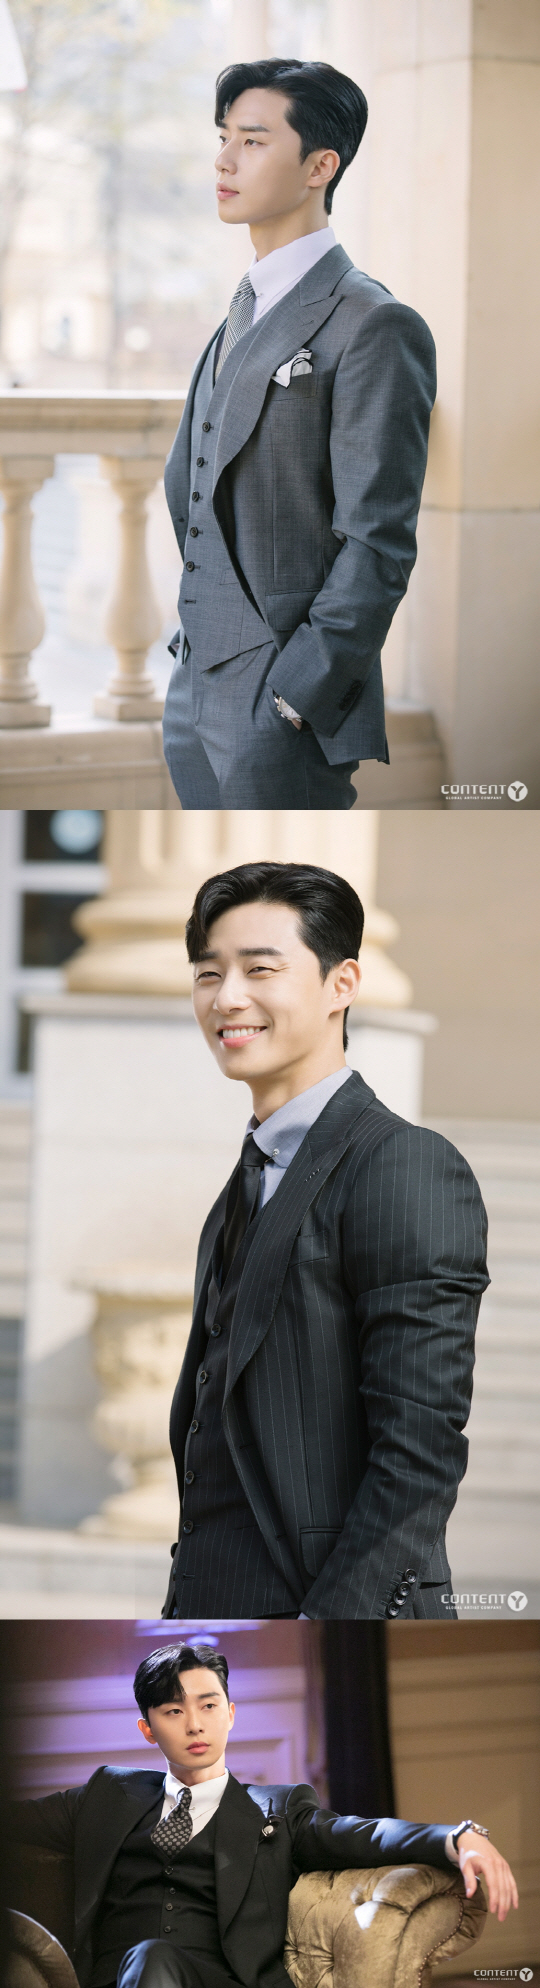 Prosymkungler Park Seo-joon returns to the home theaterIn the TVN drama Why is Secretary Kim doing that (playplayed by Jung Eun-young, directed by Park Joon-hwa), which will be broadcasted on the 6th, Park Seo-joon will take on the role of Lee Yeongjun, vice chairman of narcissist who has everything from power, face and skill, but is united with his own troubles. ...Park Seo-joon, who solidifies the title of Trust and See Actor, will take three points to see what charm he will tap viewers hearts this time.Park Seo-joon has been immersed in the character as if he was wearing custom clothes for each work.Drama She Was Pretty, a tangled magazine editor, Ssam, My Way, a young martial arts player, and a police officer who is motivated by the movie Youth Police.Park Seo-joon is expected to capture the house theater by creating a 200% synchro rate character in this Why is Kim Secretary?Lee Yeongjun, who is divided by Park Seo-joon, is the end king of narcissism, which is filled with narcissism. He is a person who has a charismatic and charming charm.Park Seo-joon is going to bring infinite vitality to the character with its unique authenticity and comical acting ability and will bring up the fun of the drama.Park Seo-joon has been proud of his unique presence in the romantic comedy genre, obtaining modifiers such as Loco King, Loco artisan, and Loco Bulldozer through many works.Hollys sweet eyes and arousing the excitement of The Earrings of Madame de... make the hearts of the viewers shimmer and produce Park Seo-joon sickness for each work.Park Seo-joons Loco ability is expected to shine in this drama.Kim, who has been helping him for nine years, will open a cute party struggling with the sudden resignation declaration and awaken the love cells of the house theater.Especially, it is expected to show Park Min-young and blockbuster Tubac Chemie of Kim Mi-so station by showing perfect chemistry instinct that is attached to anyone.Park Seo-joon has been perfecting any costume with a multi-shouldered and superior 9th grade ratio as well as a brilliant giddy, and has improved the characters perfection.In Drama Ssam, My Way, taste sniper training fashion gained full support from teenagers to 2030 men, and in the movie Youth Police, the warm uniform pit stimulated The Earrings of Madame de....Not only Acting, but also the external part of the character is delicately concerned, and I tried to make a more perfect character.In this Why is Kim Secretary?, he will play the role of vice chairman of the chaebol, so he will add the fun of viewers with the top 1% high-quality suit fashion.Park Seo-joons luxury suit pit, which will show the overwhelming aura every time and show what the suits seat is, is attracting attention as another point of observation that can not be missed in the drama.On the other hand, TVNs new tree drama Why is Kim Secretary starring Park Seo-joon, Park Min-young and Lee Tae-hwan, has everything from power, face, and skill, but he is a narcissist vice chairman Lee Yeongjun, It will be broadcast first at 9:30 pm on the 6th (Wednesday) with the departure of Park Min-young.